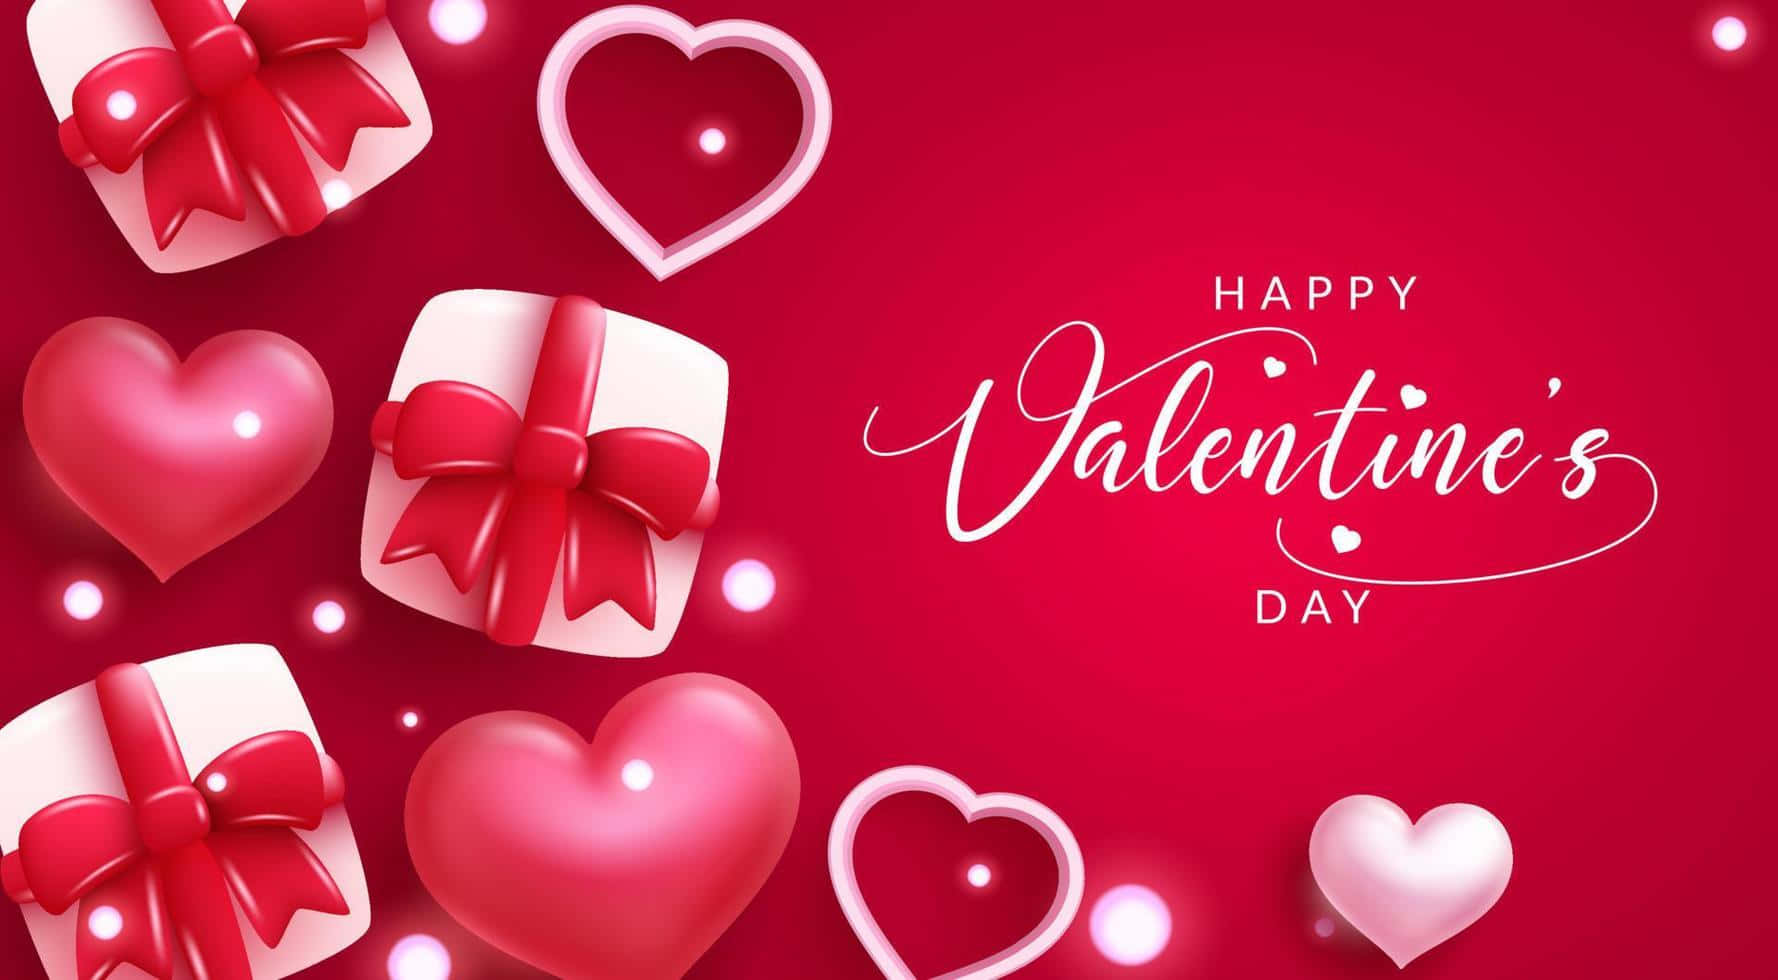 Cute Happy Valentine Day Gifts And Hearts Wallpaper